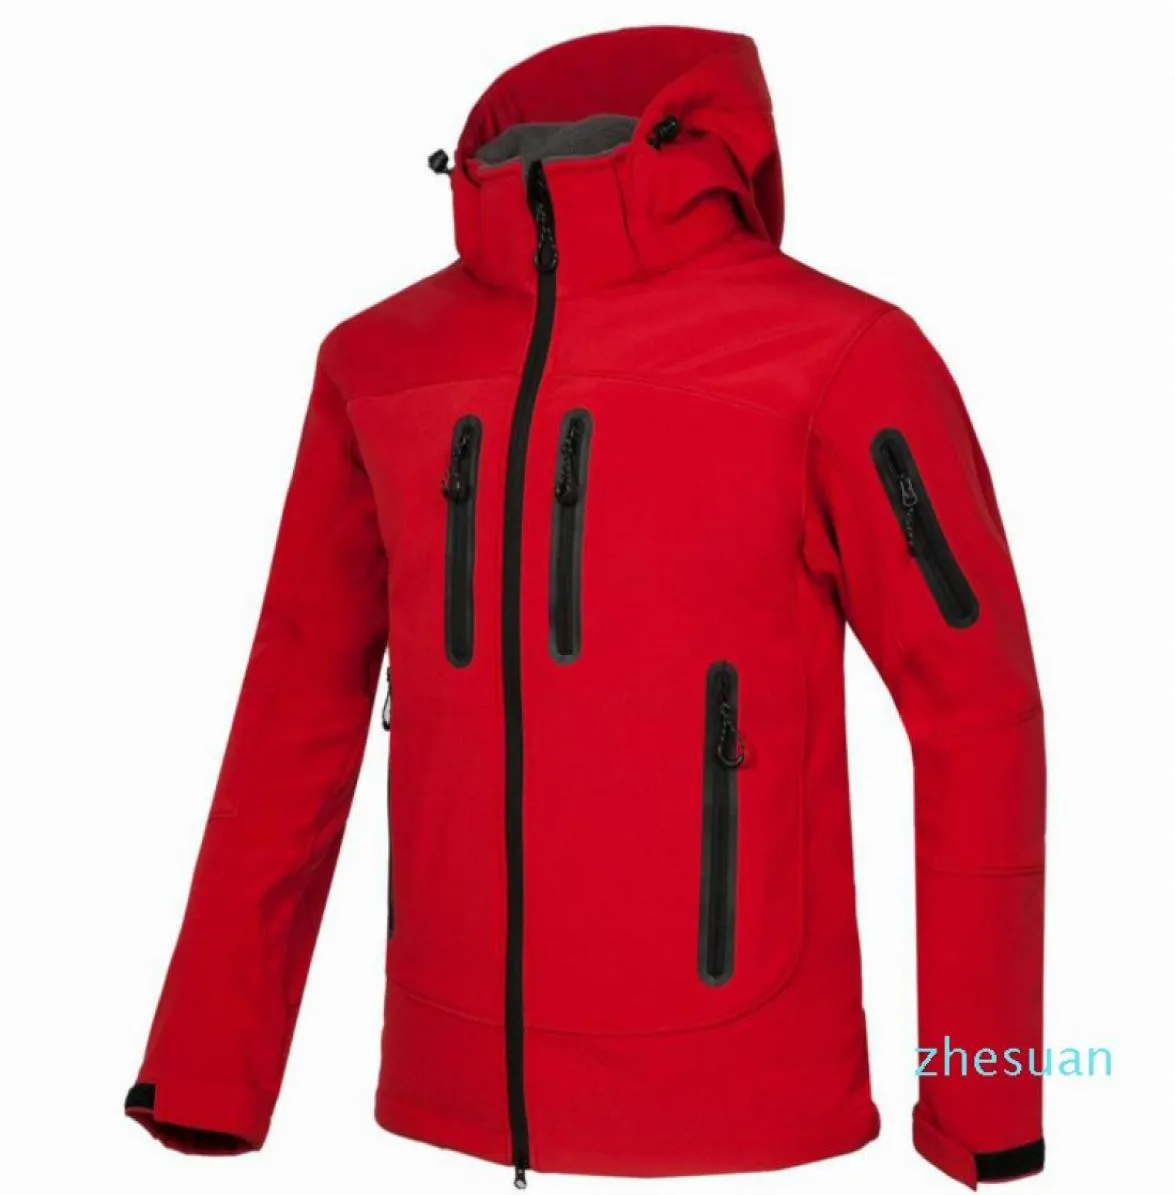 new Men HELLY Jacket Winter Hooded Softshell for Windproof and Waterproof Soft Coat Shell Jacket HANSEN Jackets Coats 1837 RED8222044